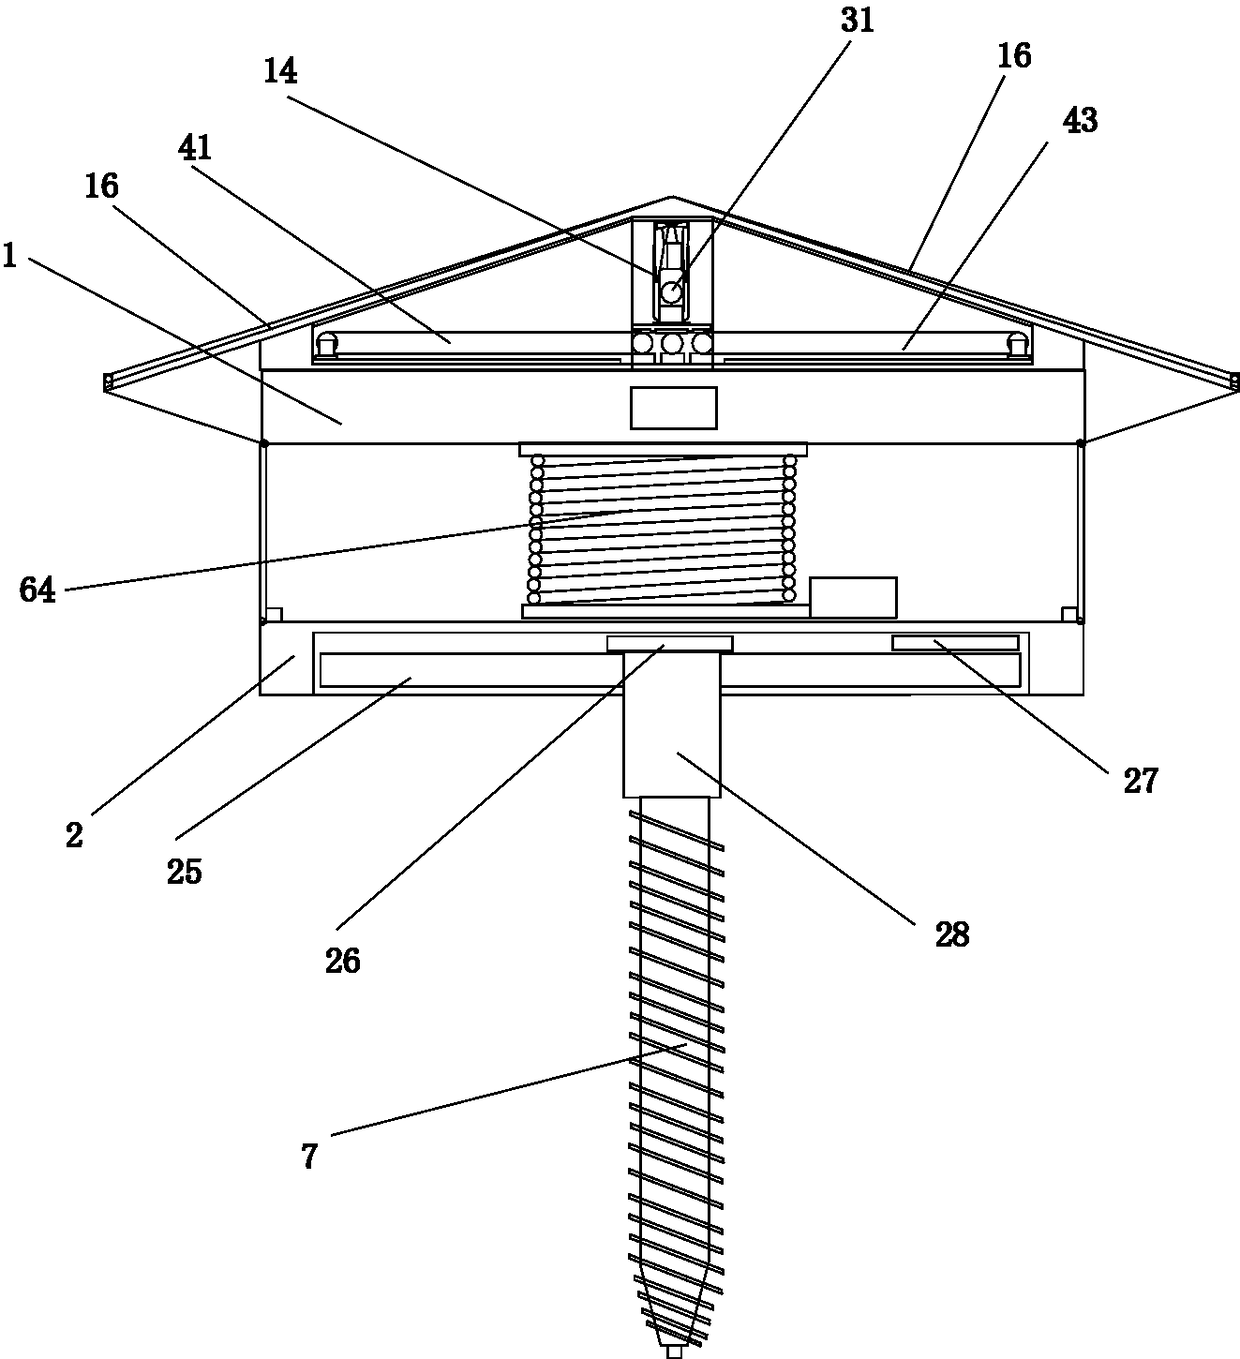 Wind-driven generator equipped with screw propulsion device